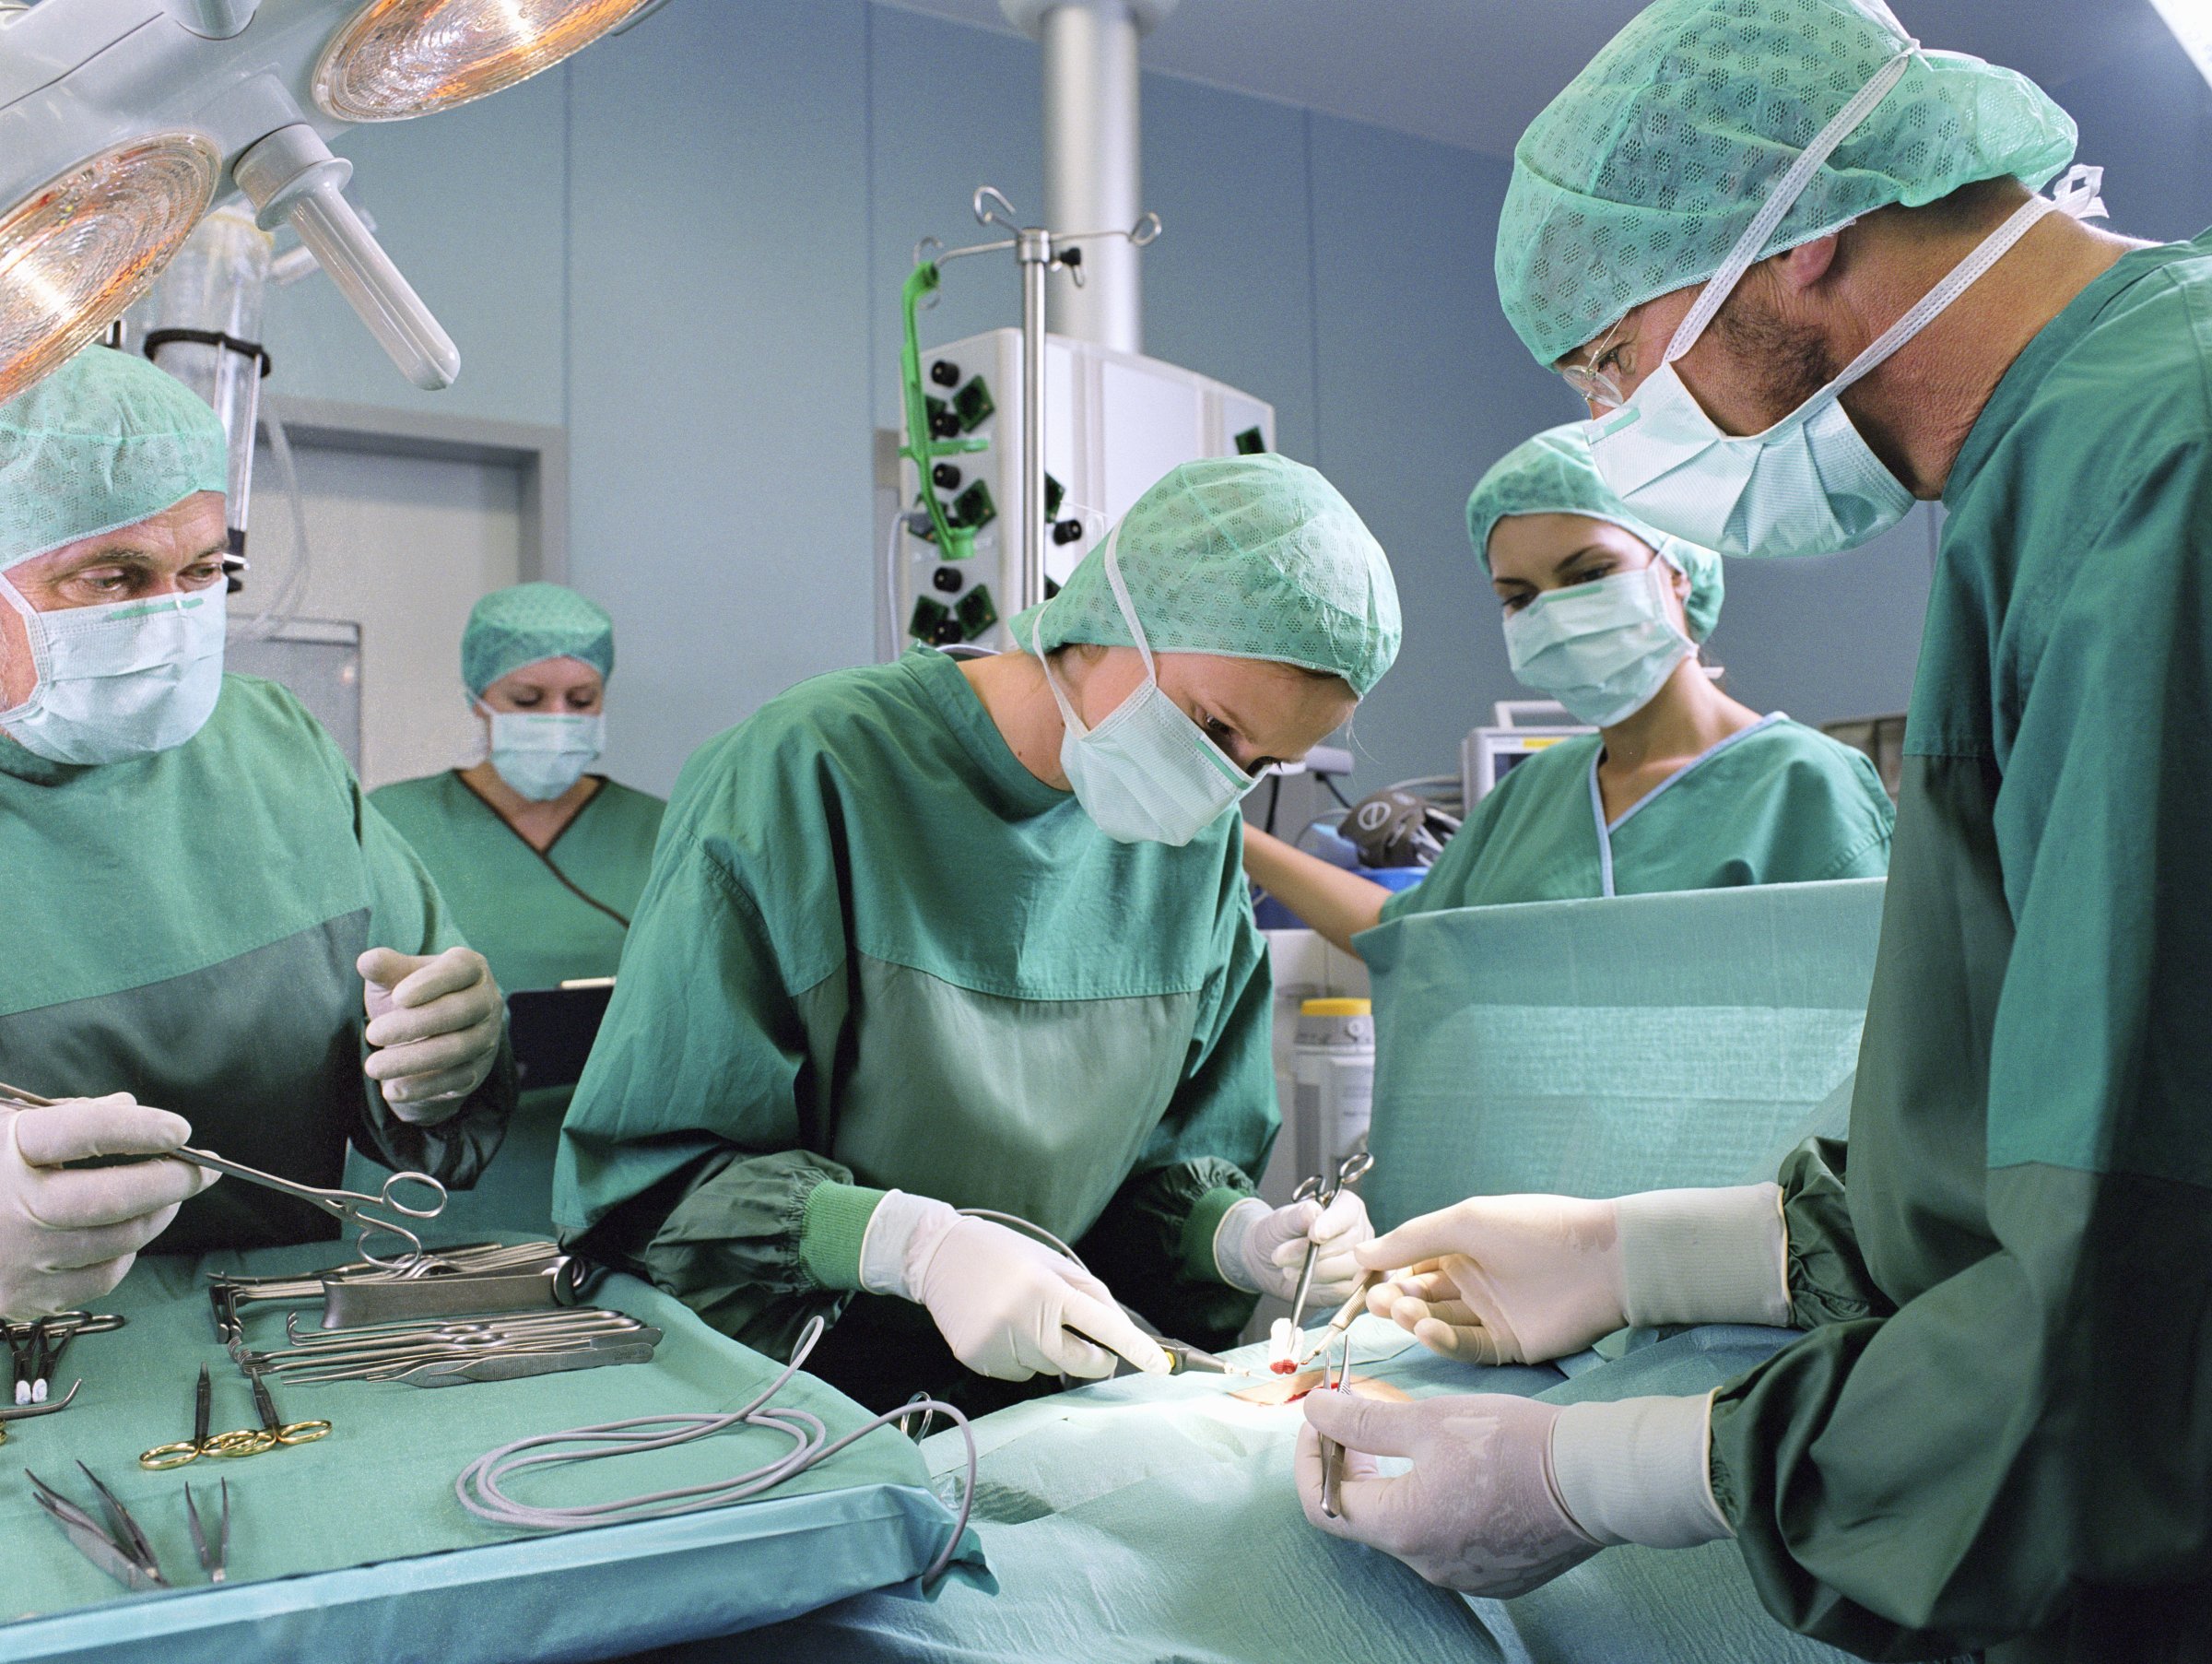 A group of surgeons work in an operating theatre.